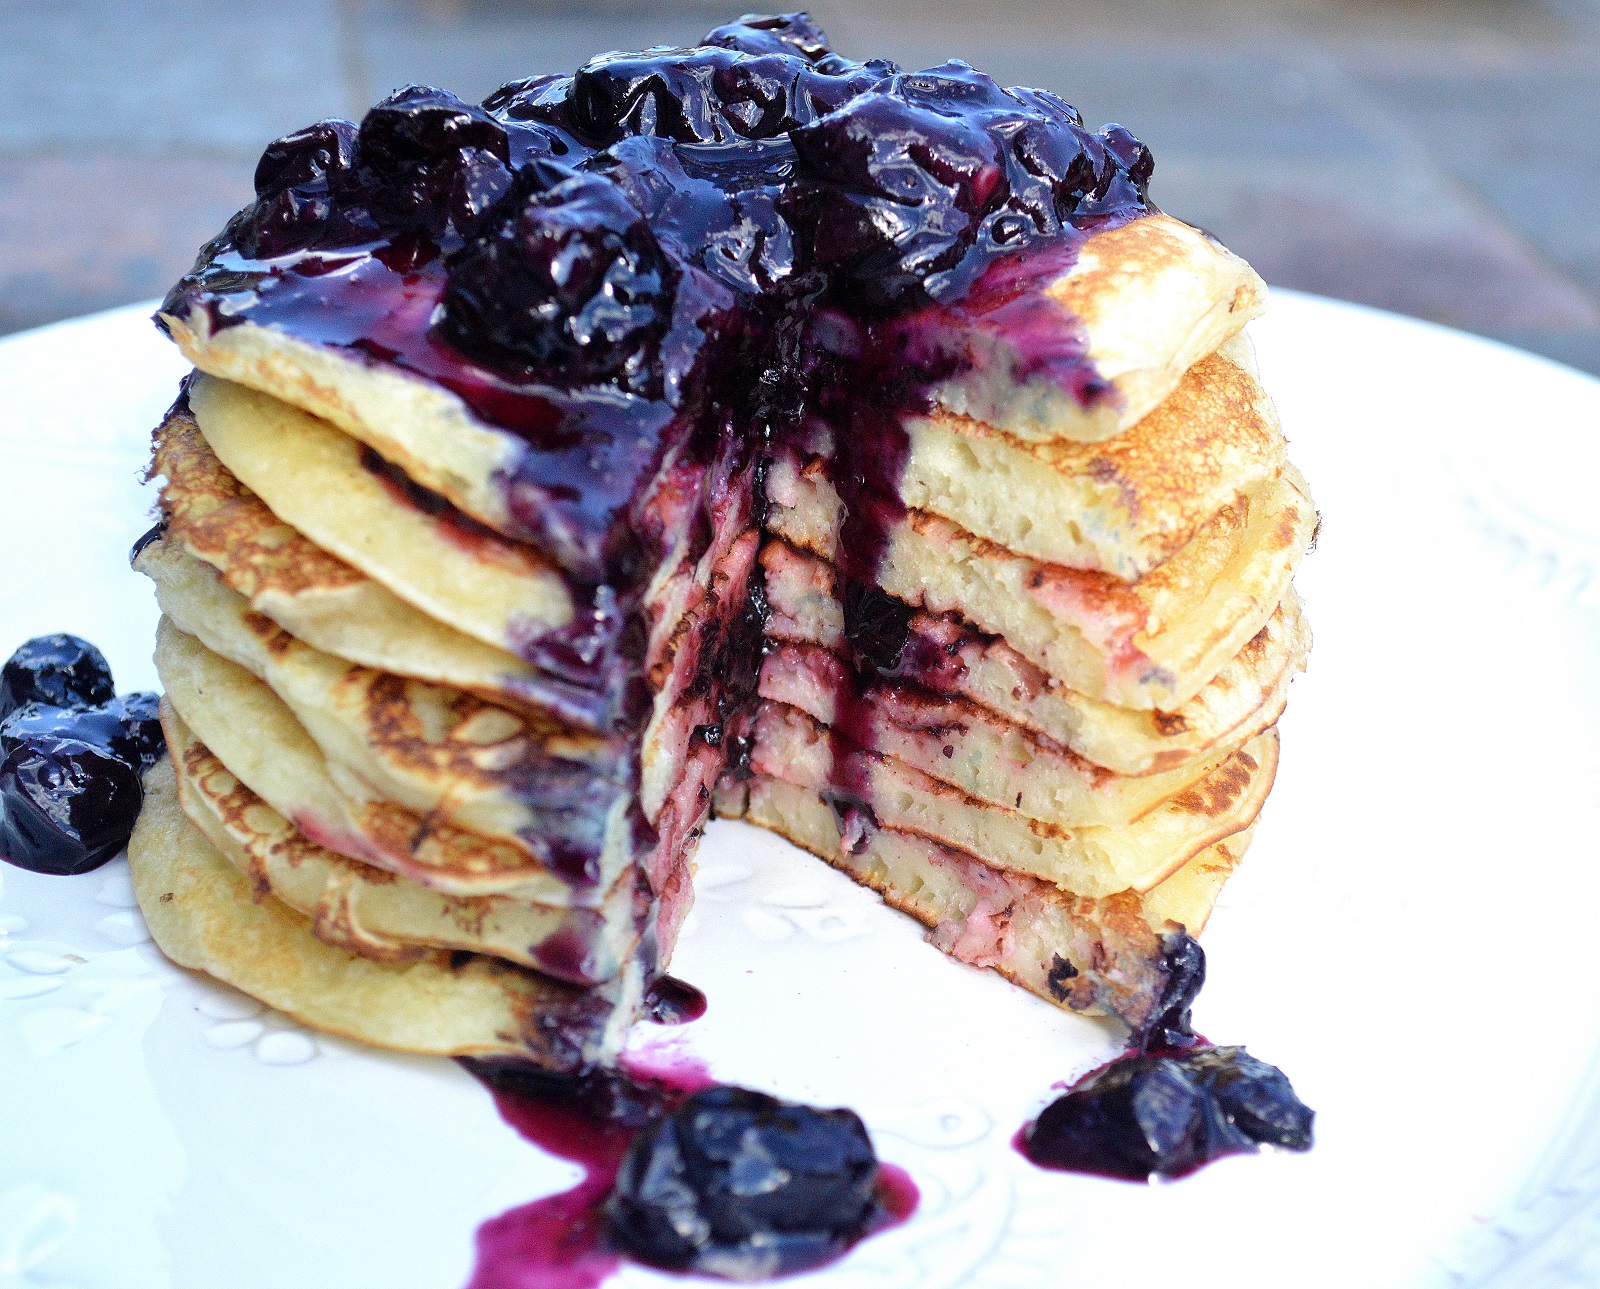 Norwegian Flat Cakes with Blueberry Compote - A cross between pancakes, waffles and crepes, these cakes are SO good you don't even need to add a thing!